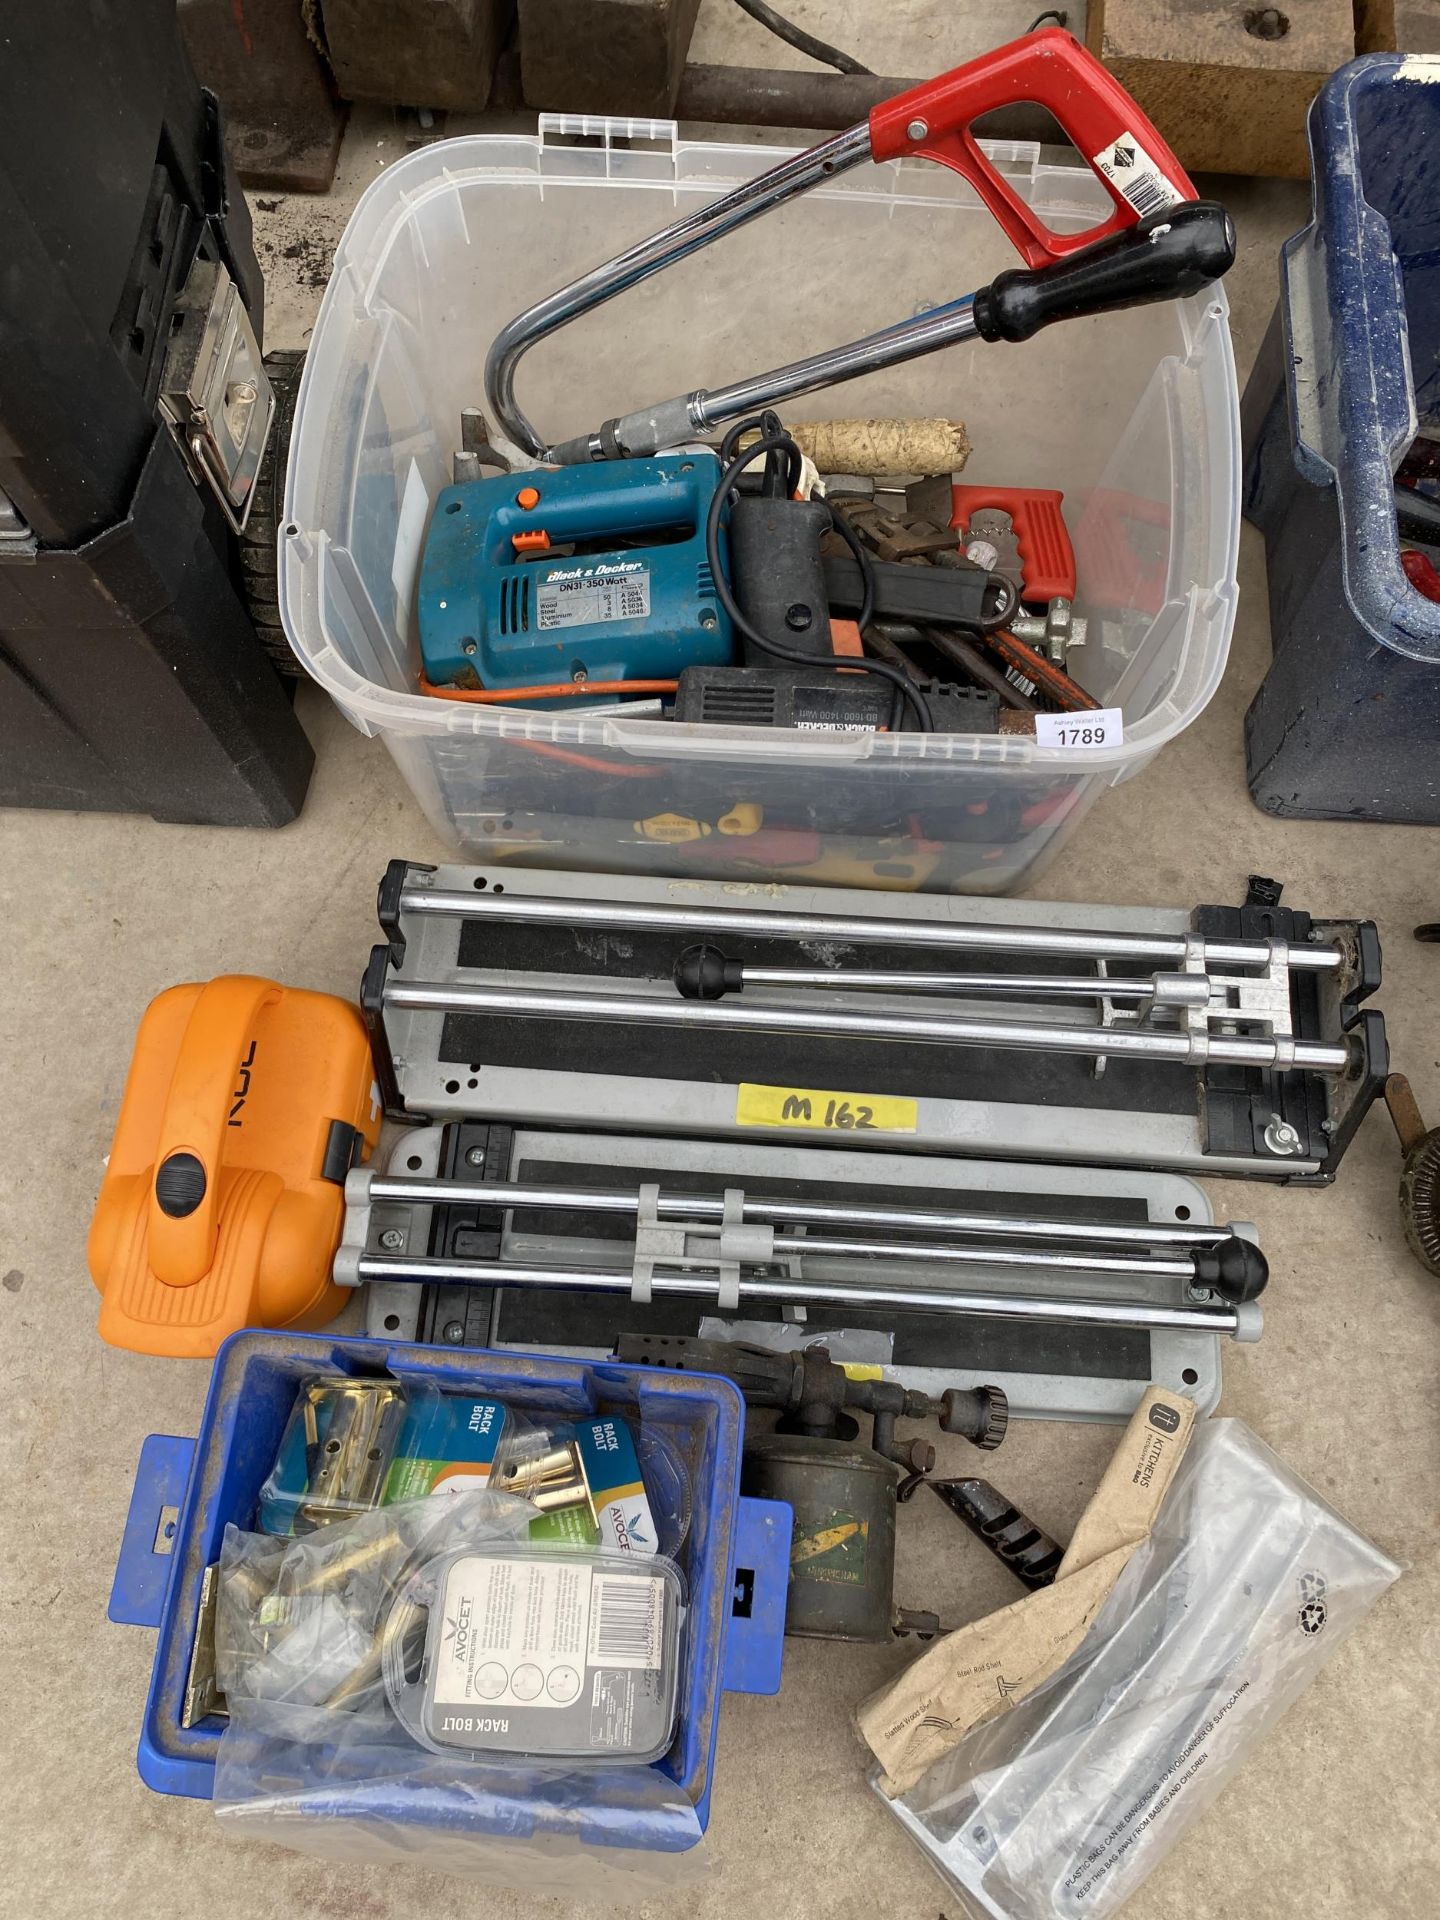 AN ASSORTMENT OF TOOLS TO INCLUDE TILE CUTTERS, A BLACK AND DECKER ELECTRIC JIGSAW AND A HACK SAW